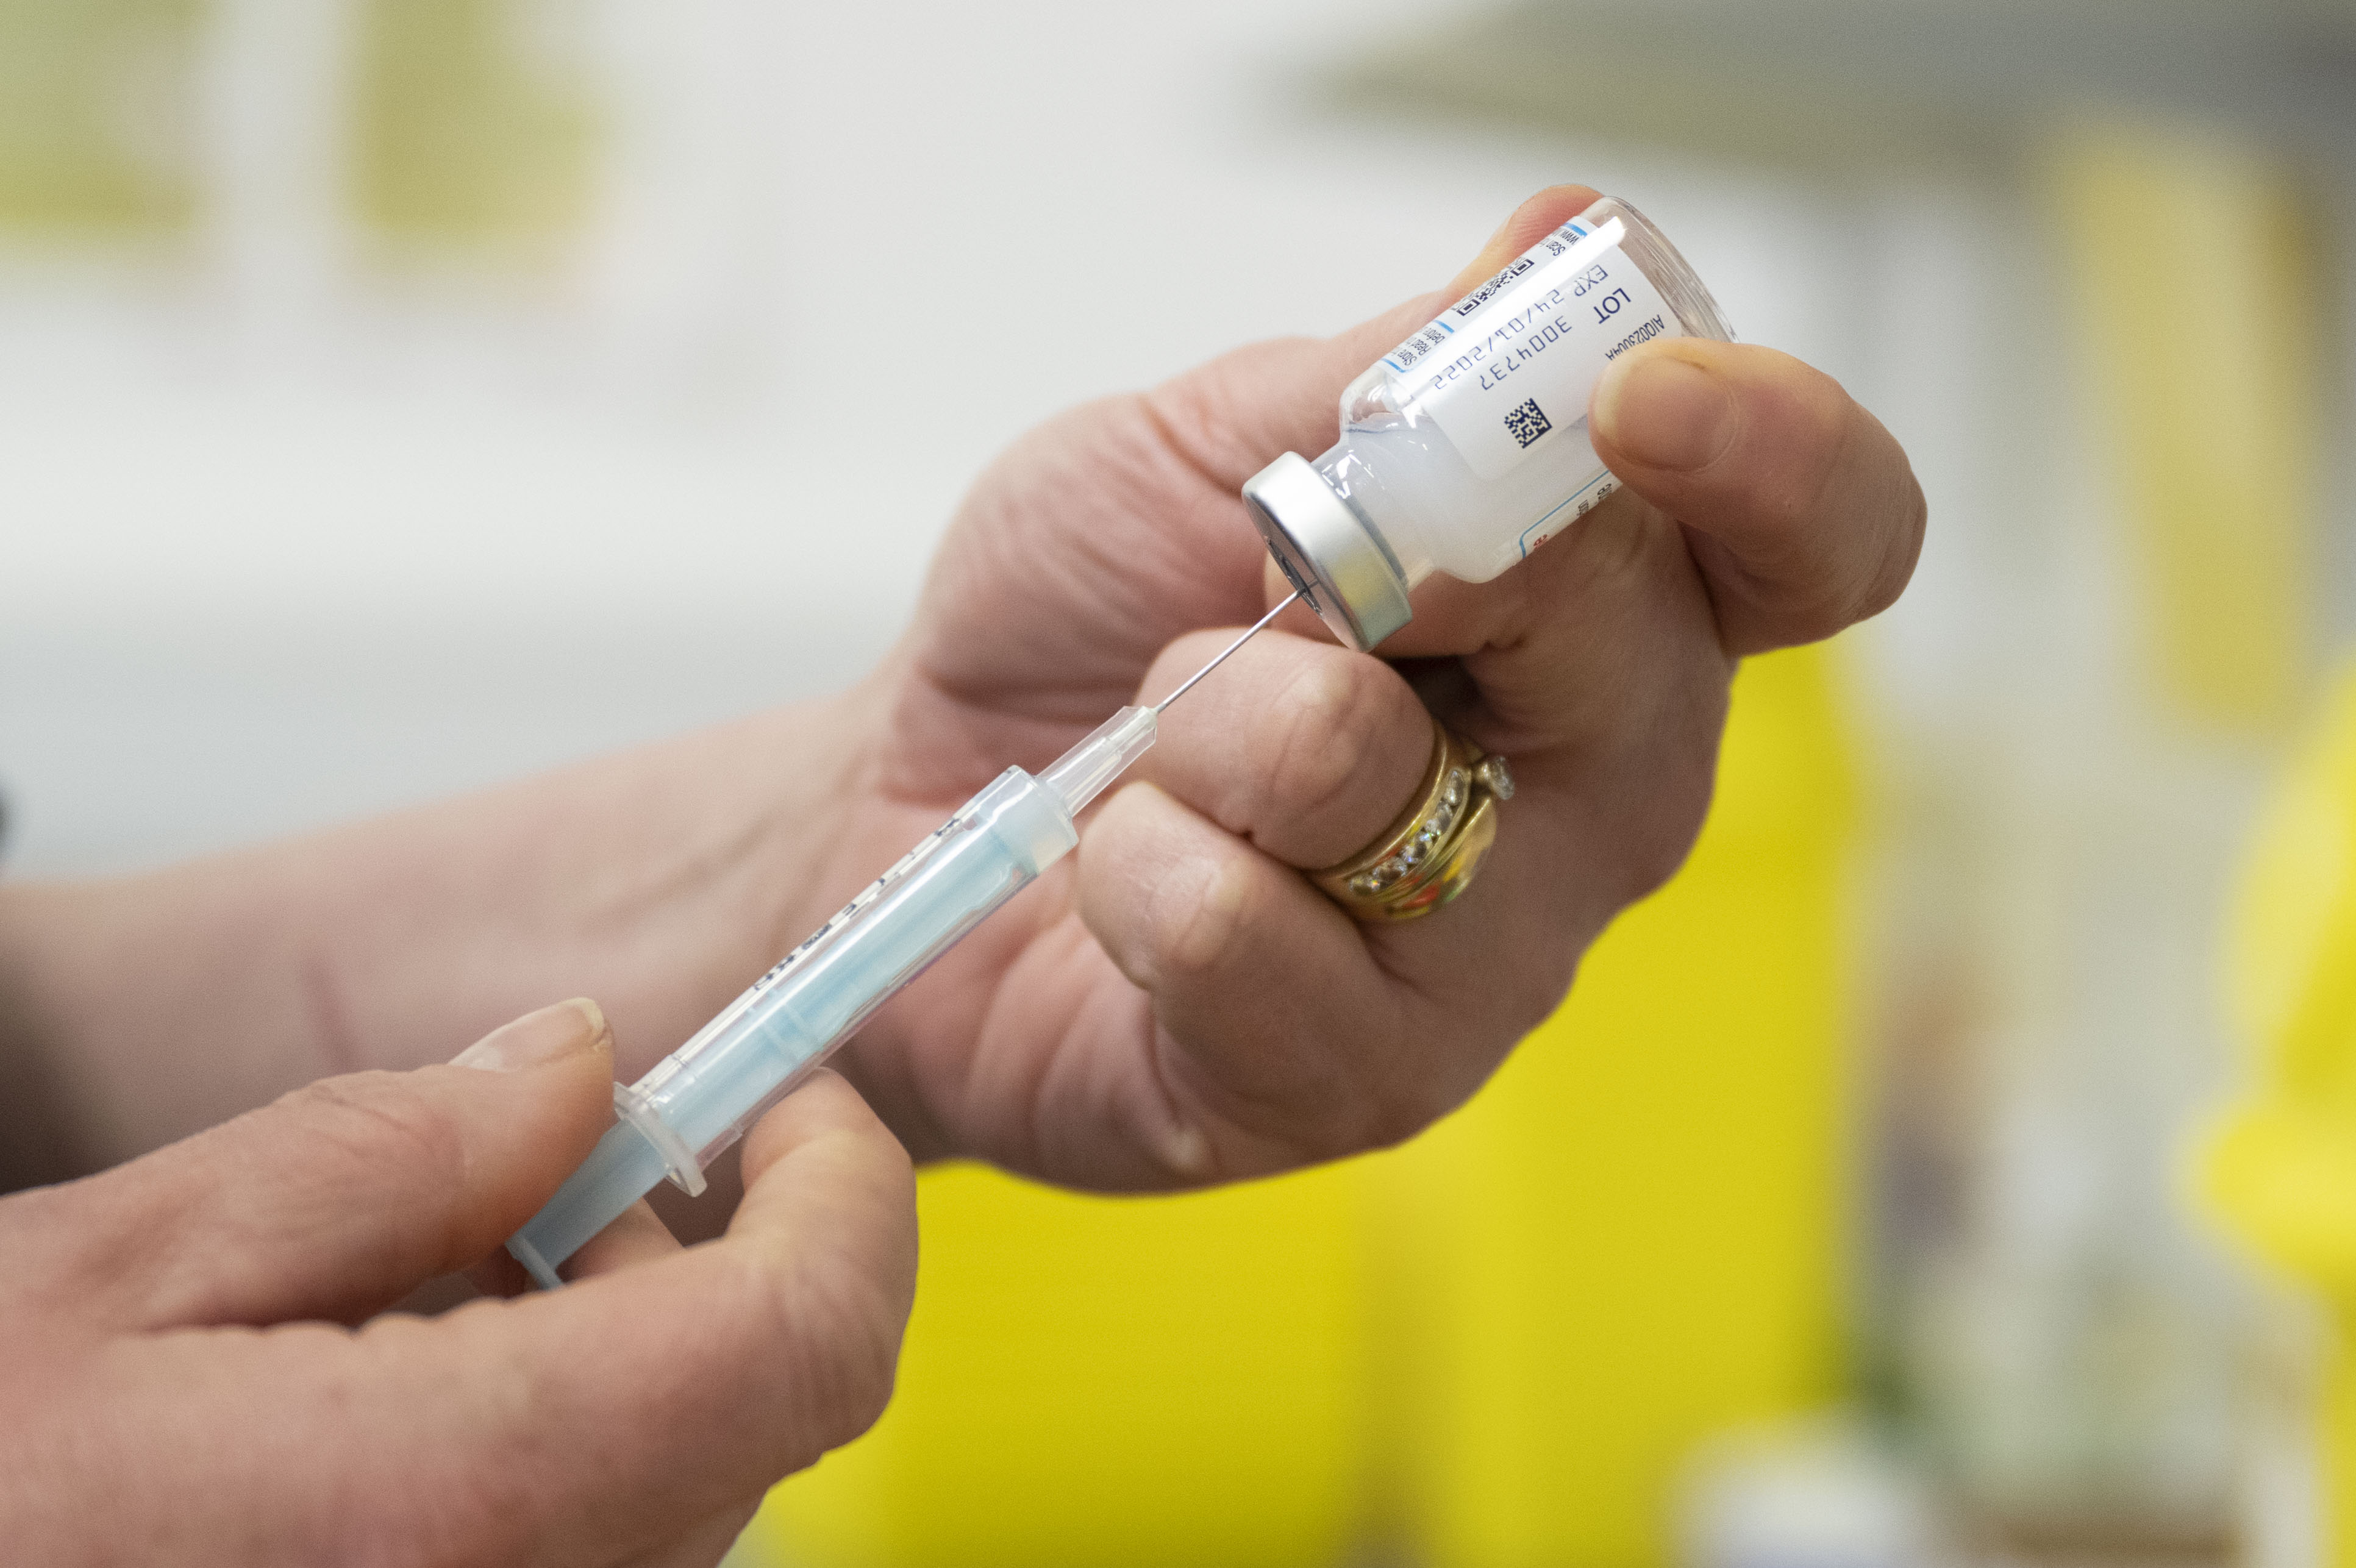 A close-up photo shows a pair of hands filling a syringe from a vial of the Moderna Covid-19 vaccine, in 2021 in Cardiff, Wales.